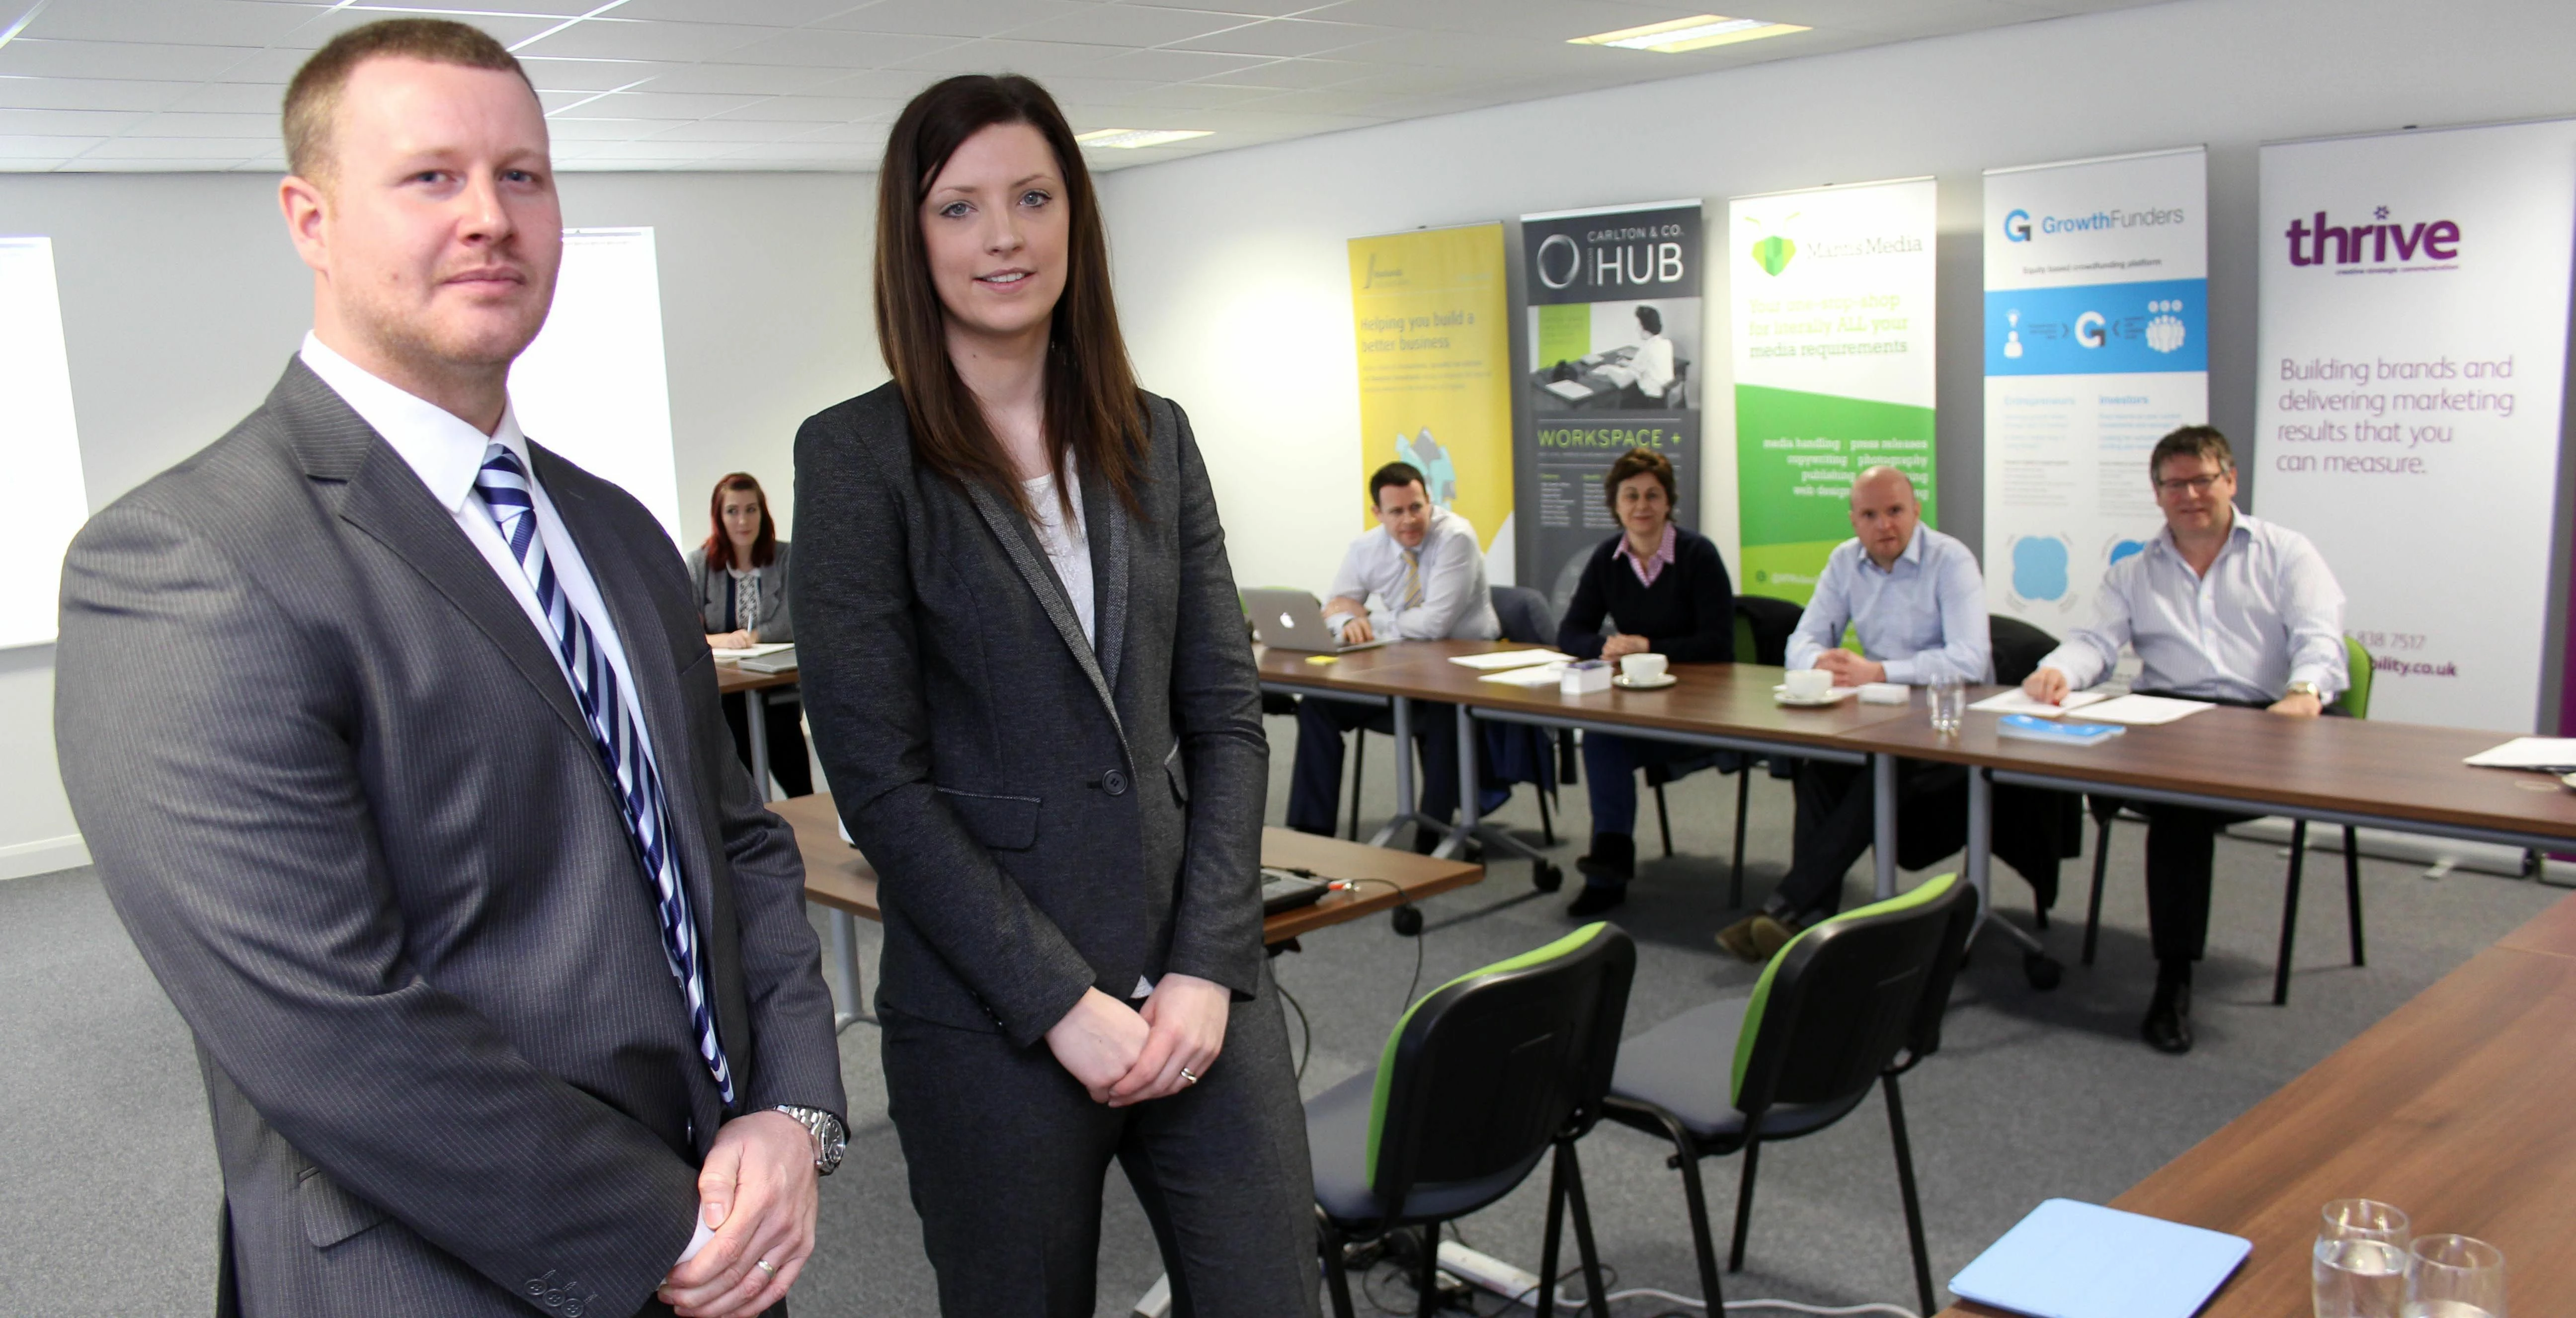 Phillip Pringle (left) and Clare Owen, from Durham-based Lostbox Ltd, in front of the HUB Partnershi